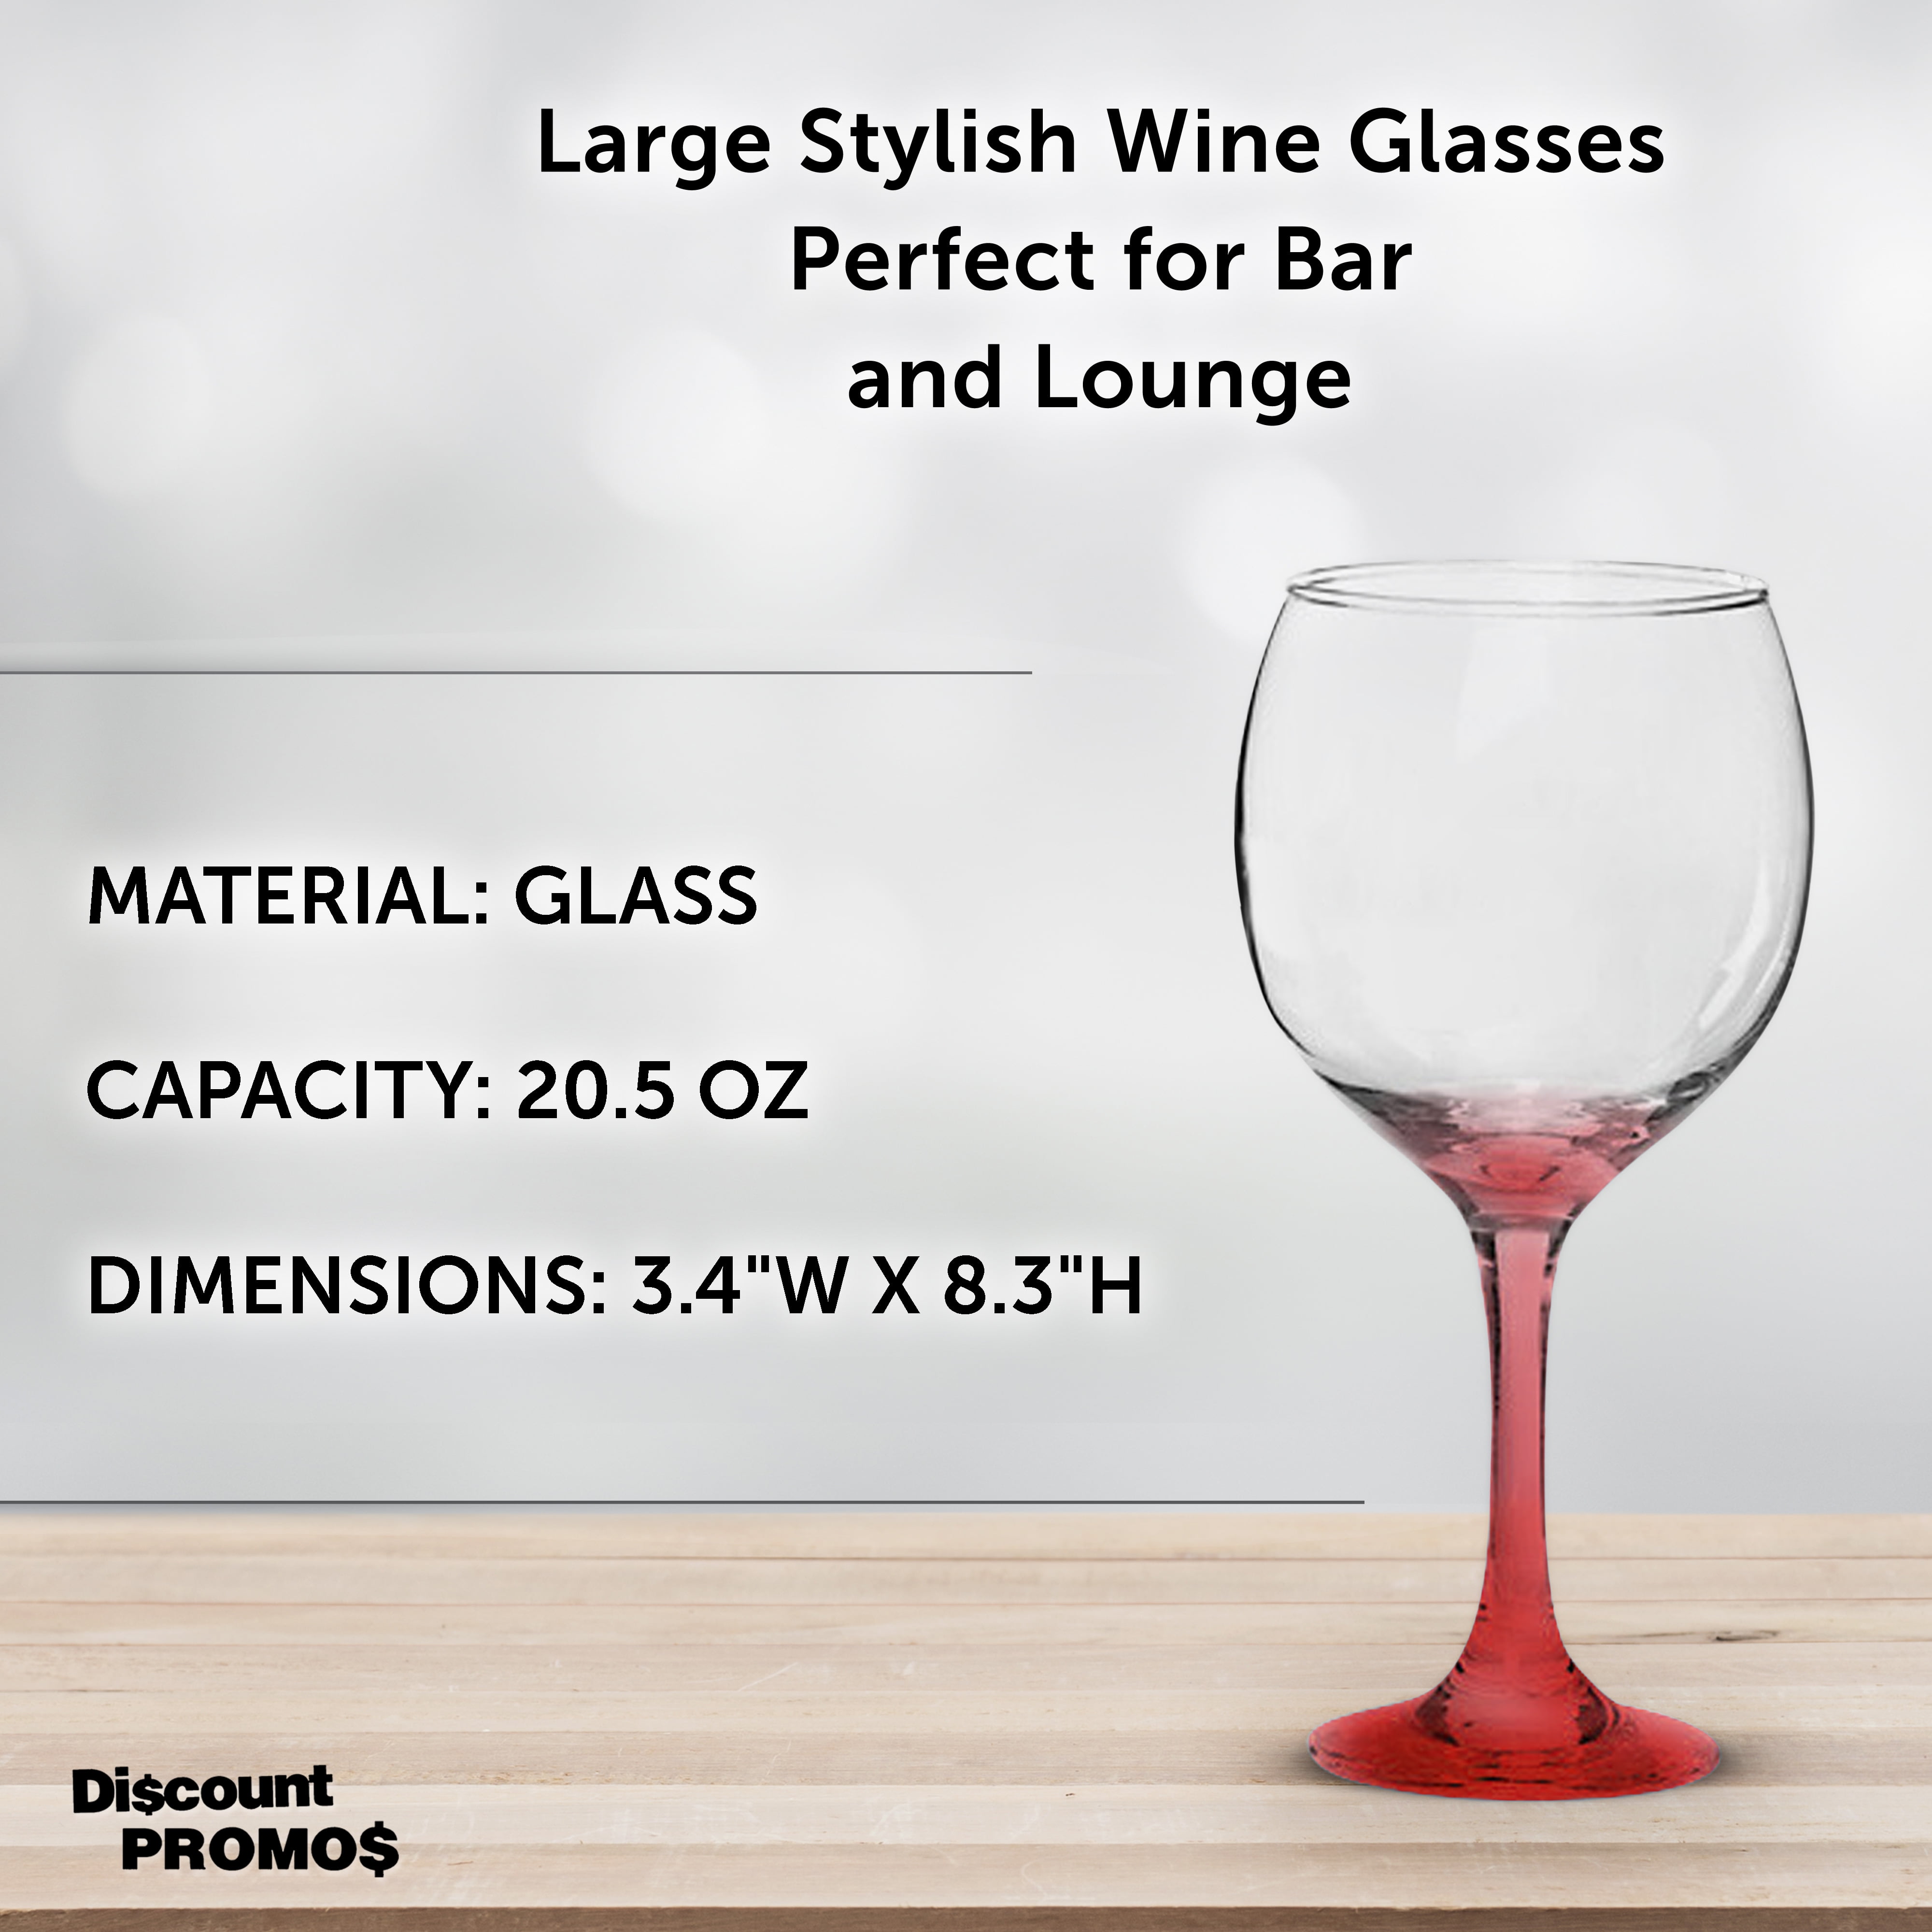 BULK 24 Premium Wine Glasses 14 Ounce - Clear Classic Wine Glass with Stem  - Great For White And Red…See more BULK 24 Premium Wine Glasses 14 Ounce 